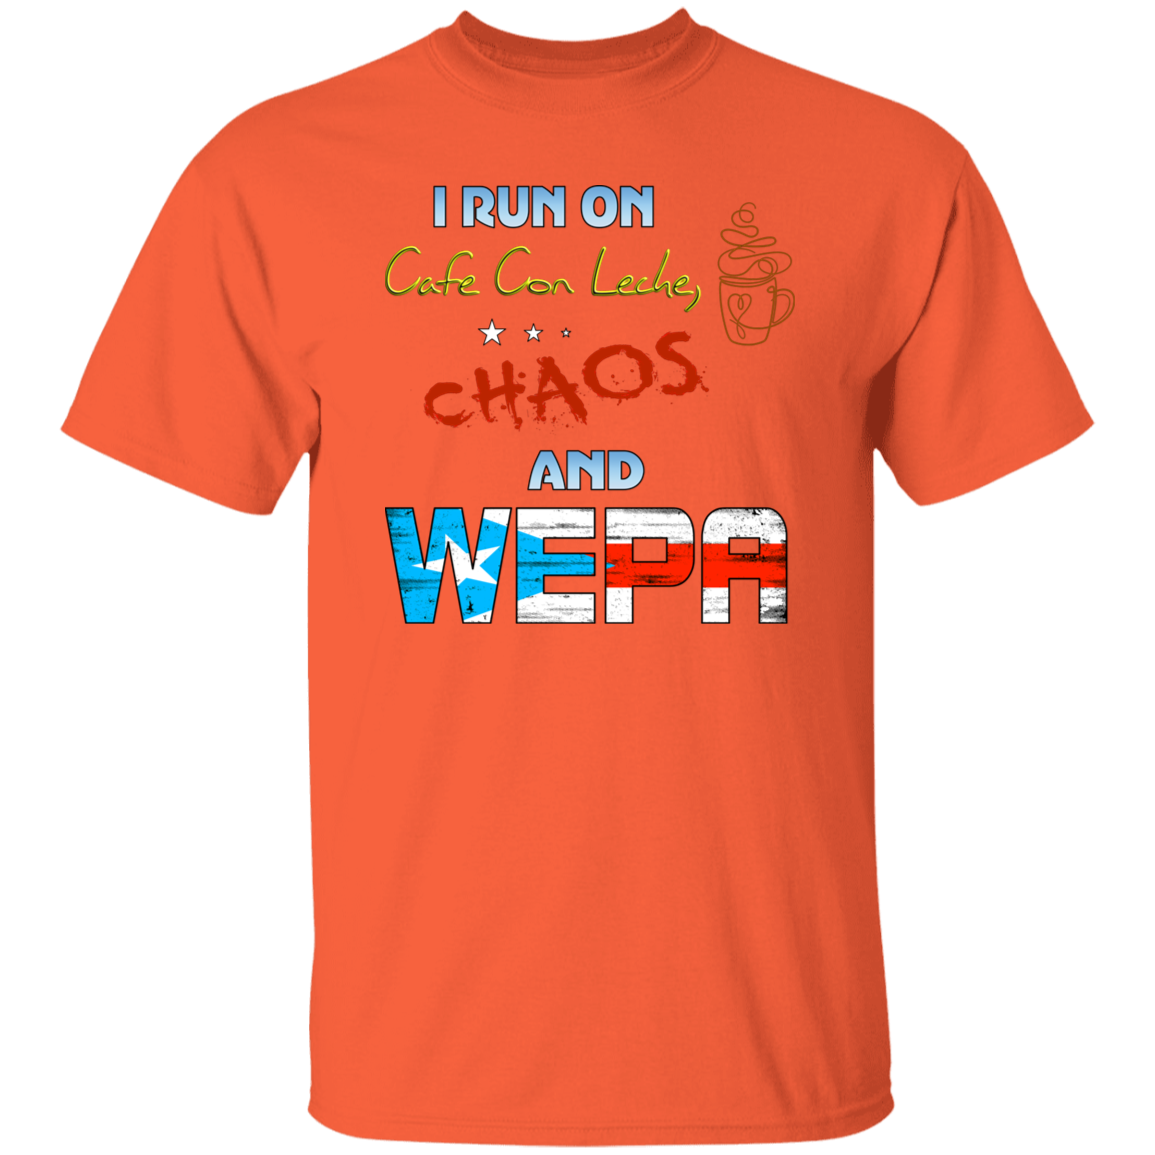 Cafe Con Leche, Chaos and Wepa 5.3 oz. T-Shirt